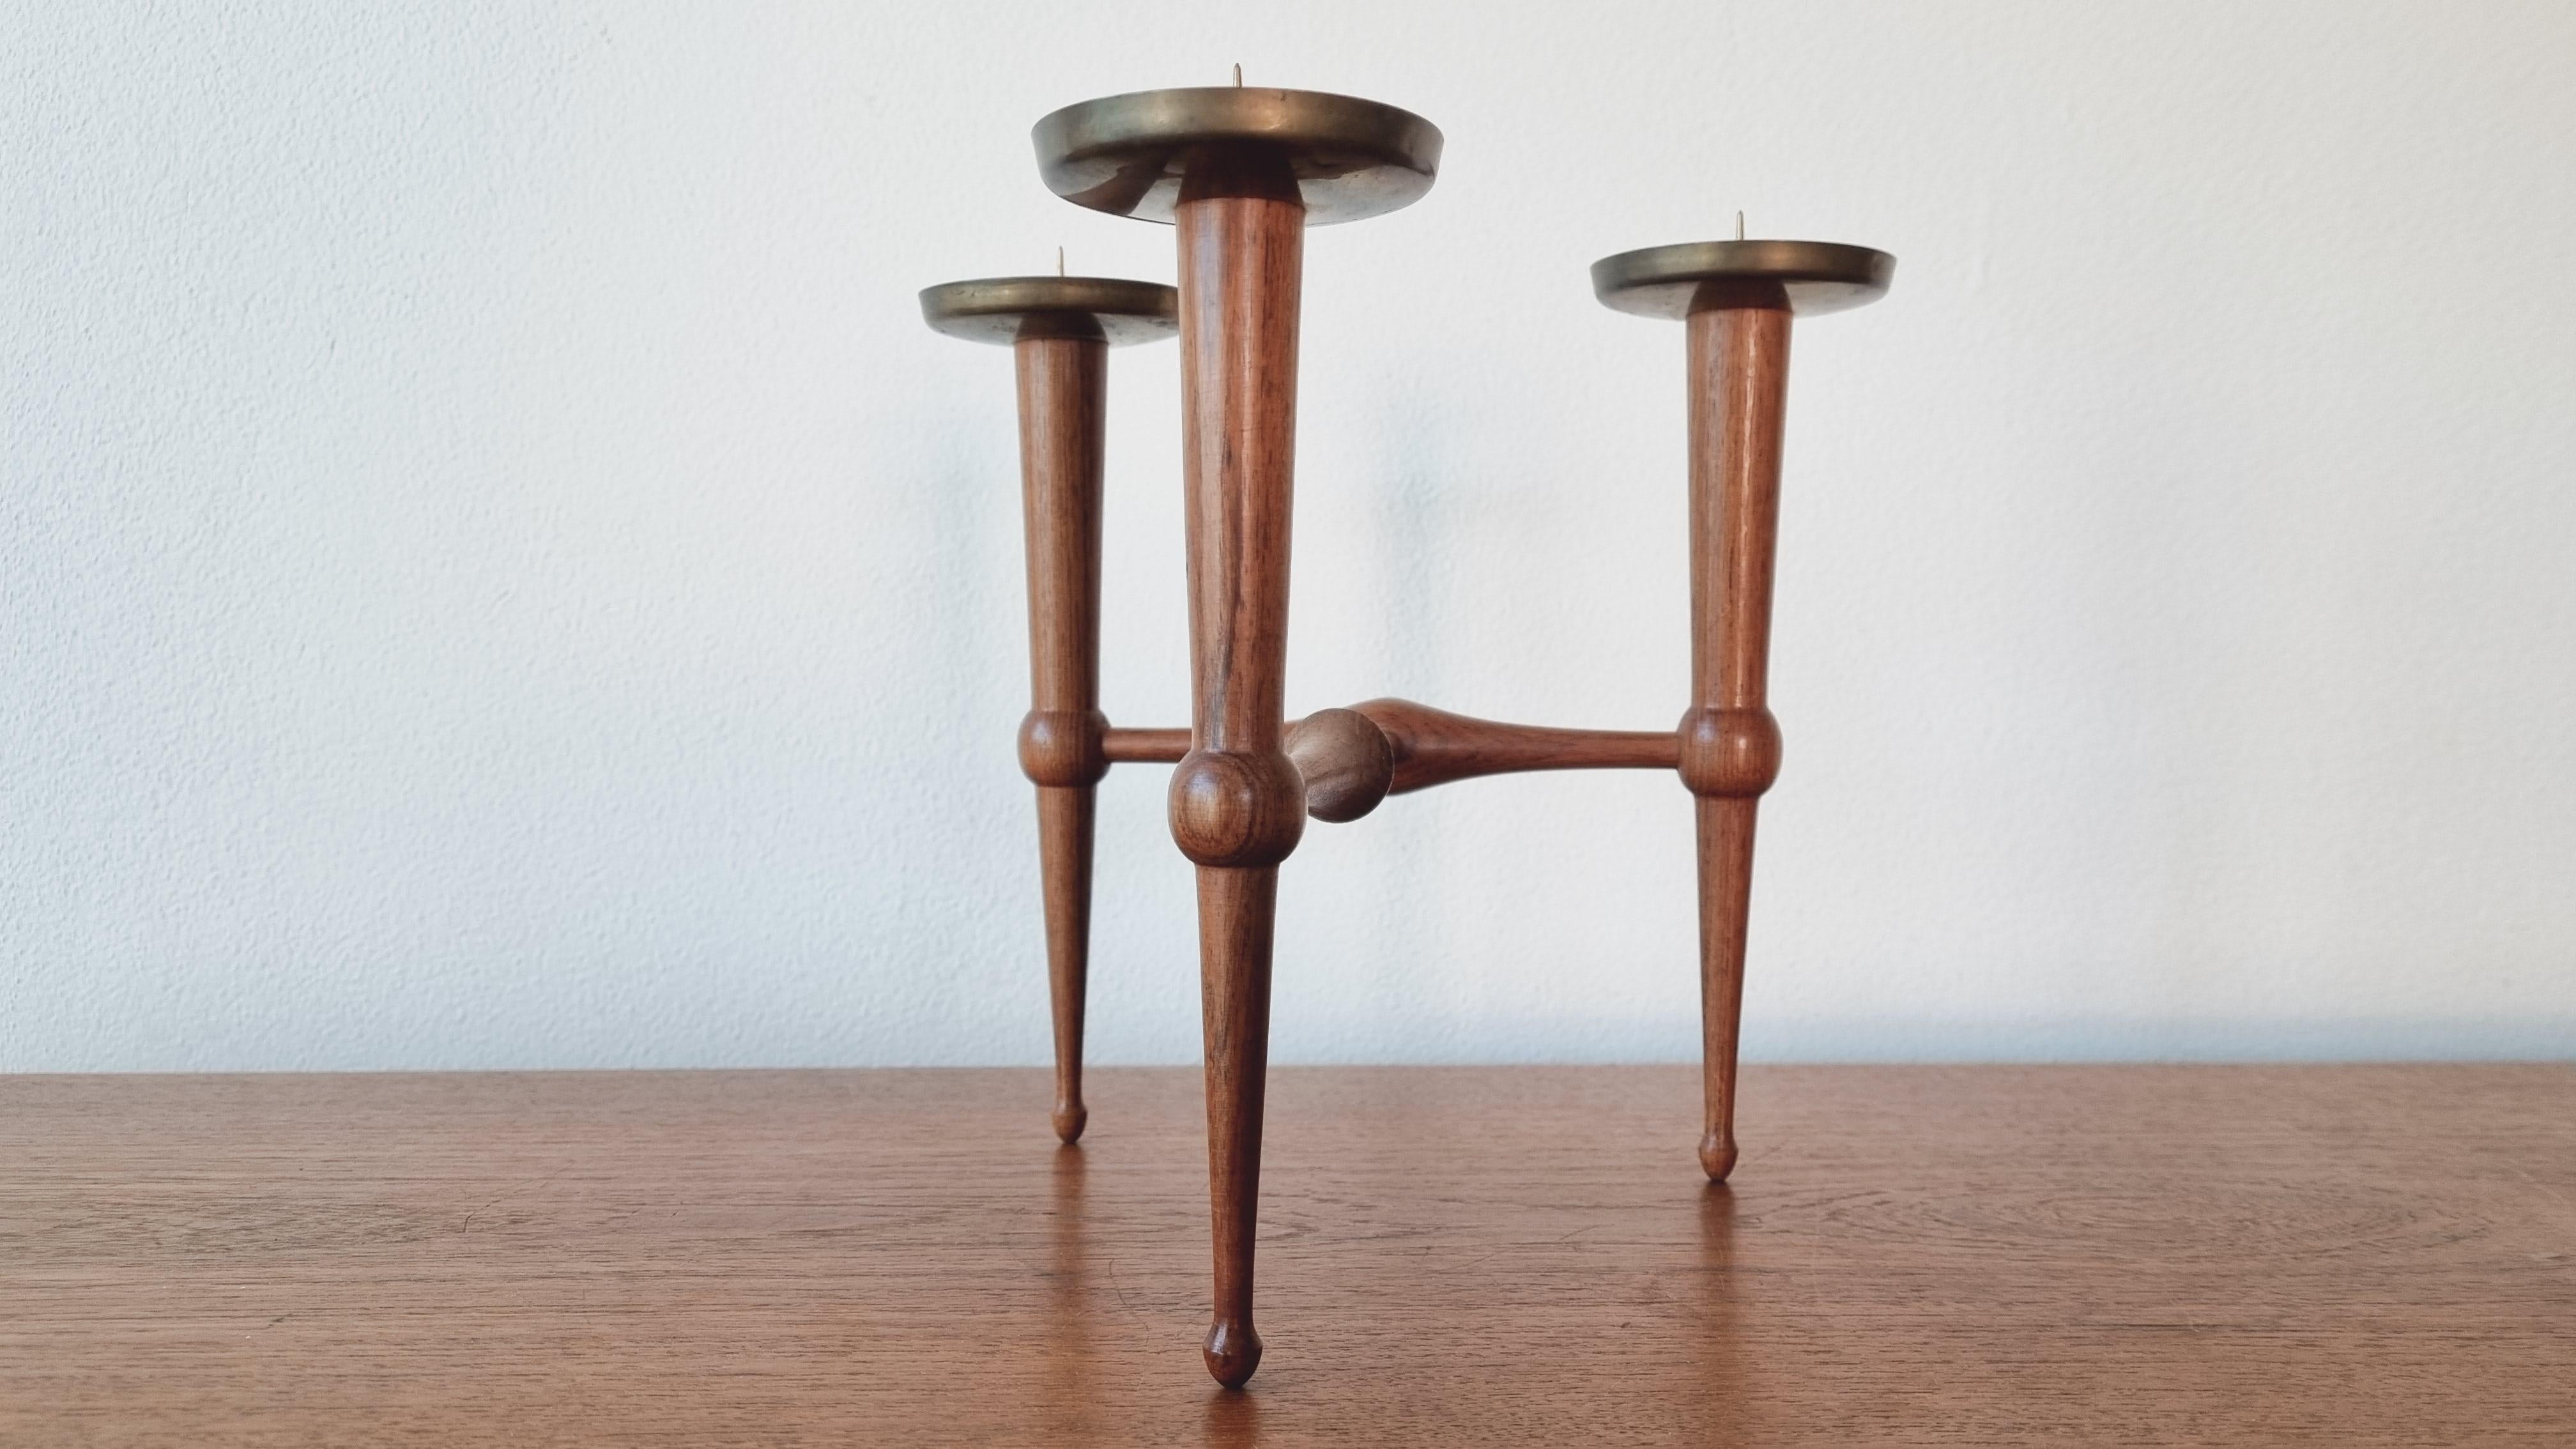 Danish Midcentury Teak and Brass Rare Table Candle Holder / Stick, Denmark, 1960s For Sale